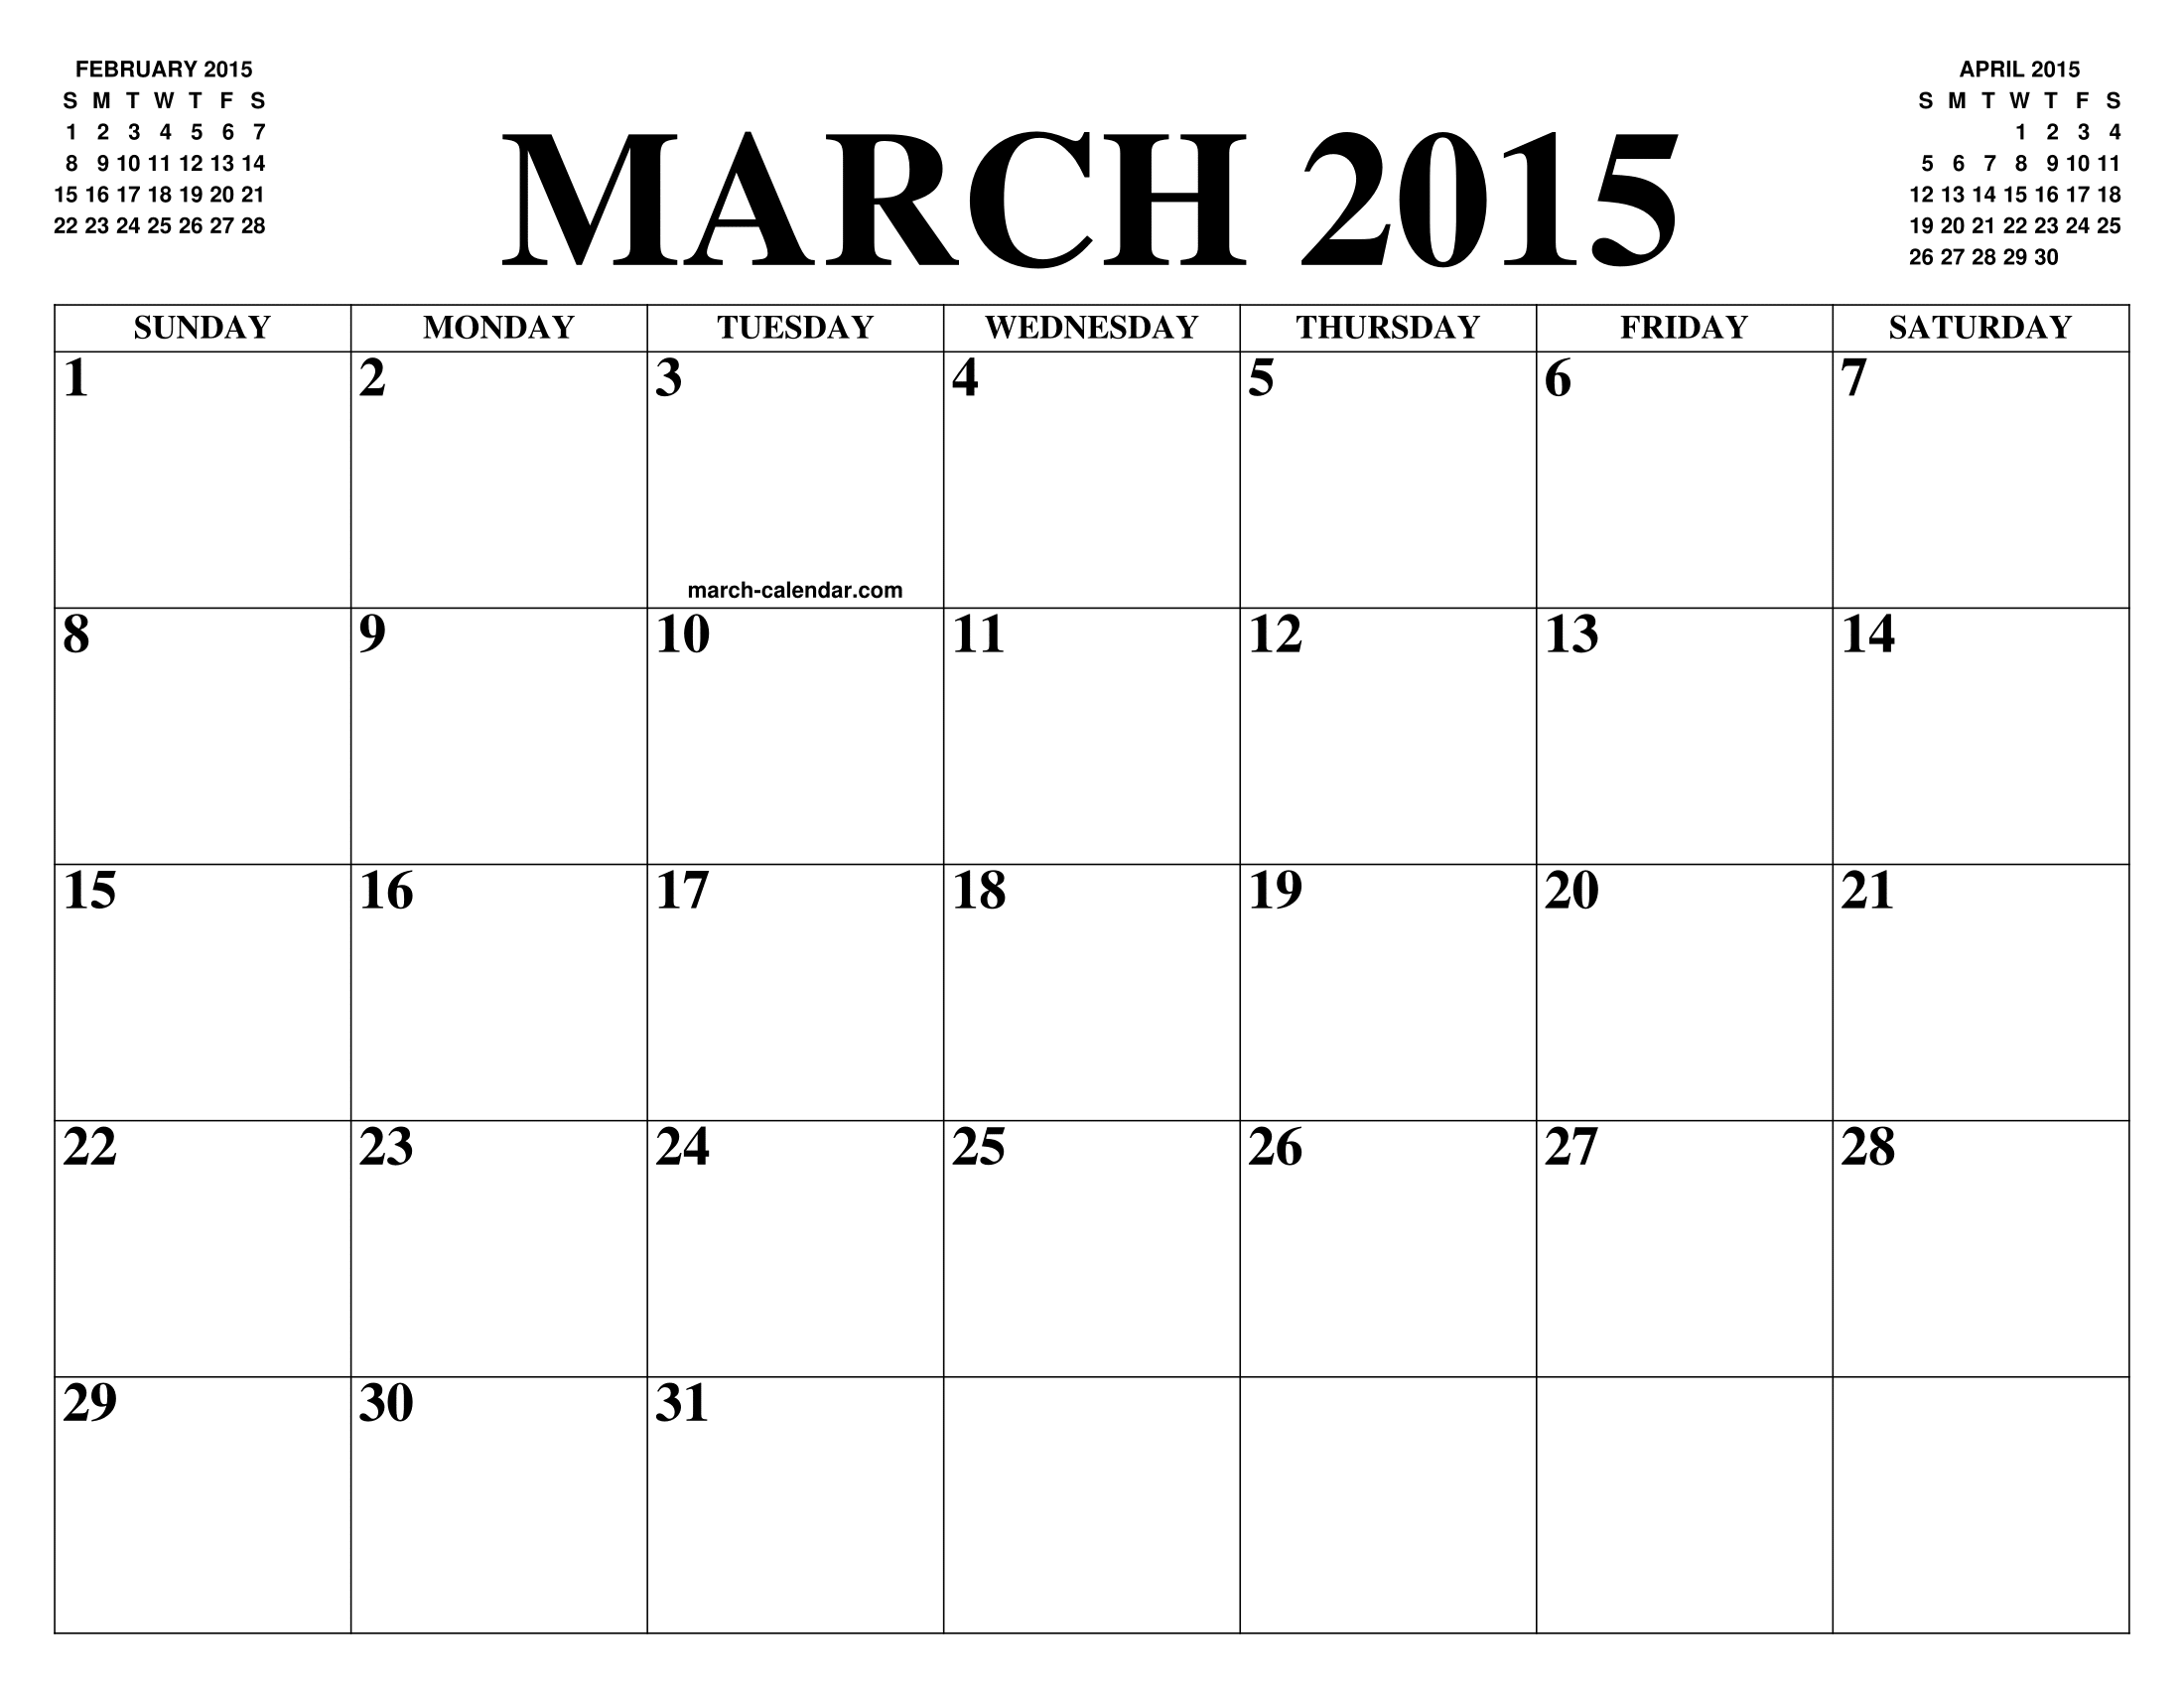 MARCH 2015 CALENDAR OF THE MONTH: FREE PRINTABLE MARCH CALENDAR OF THE